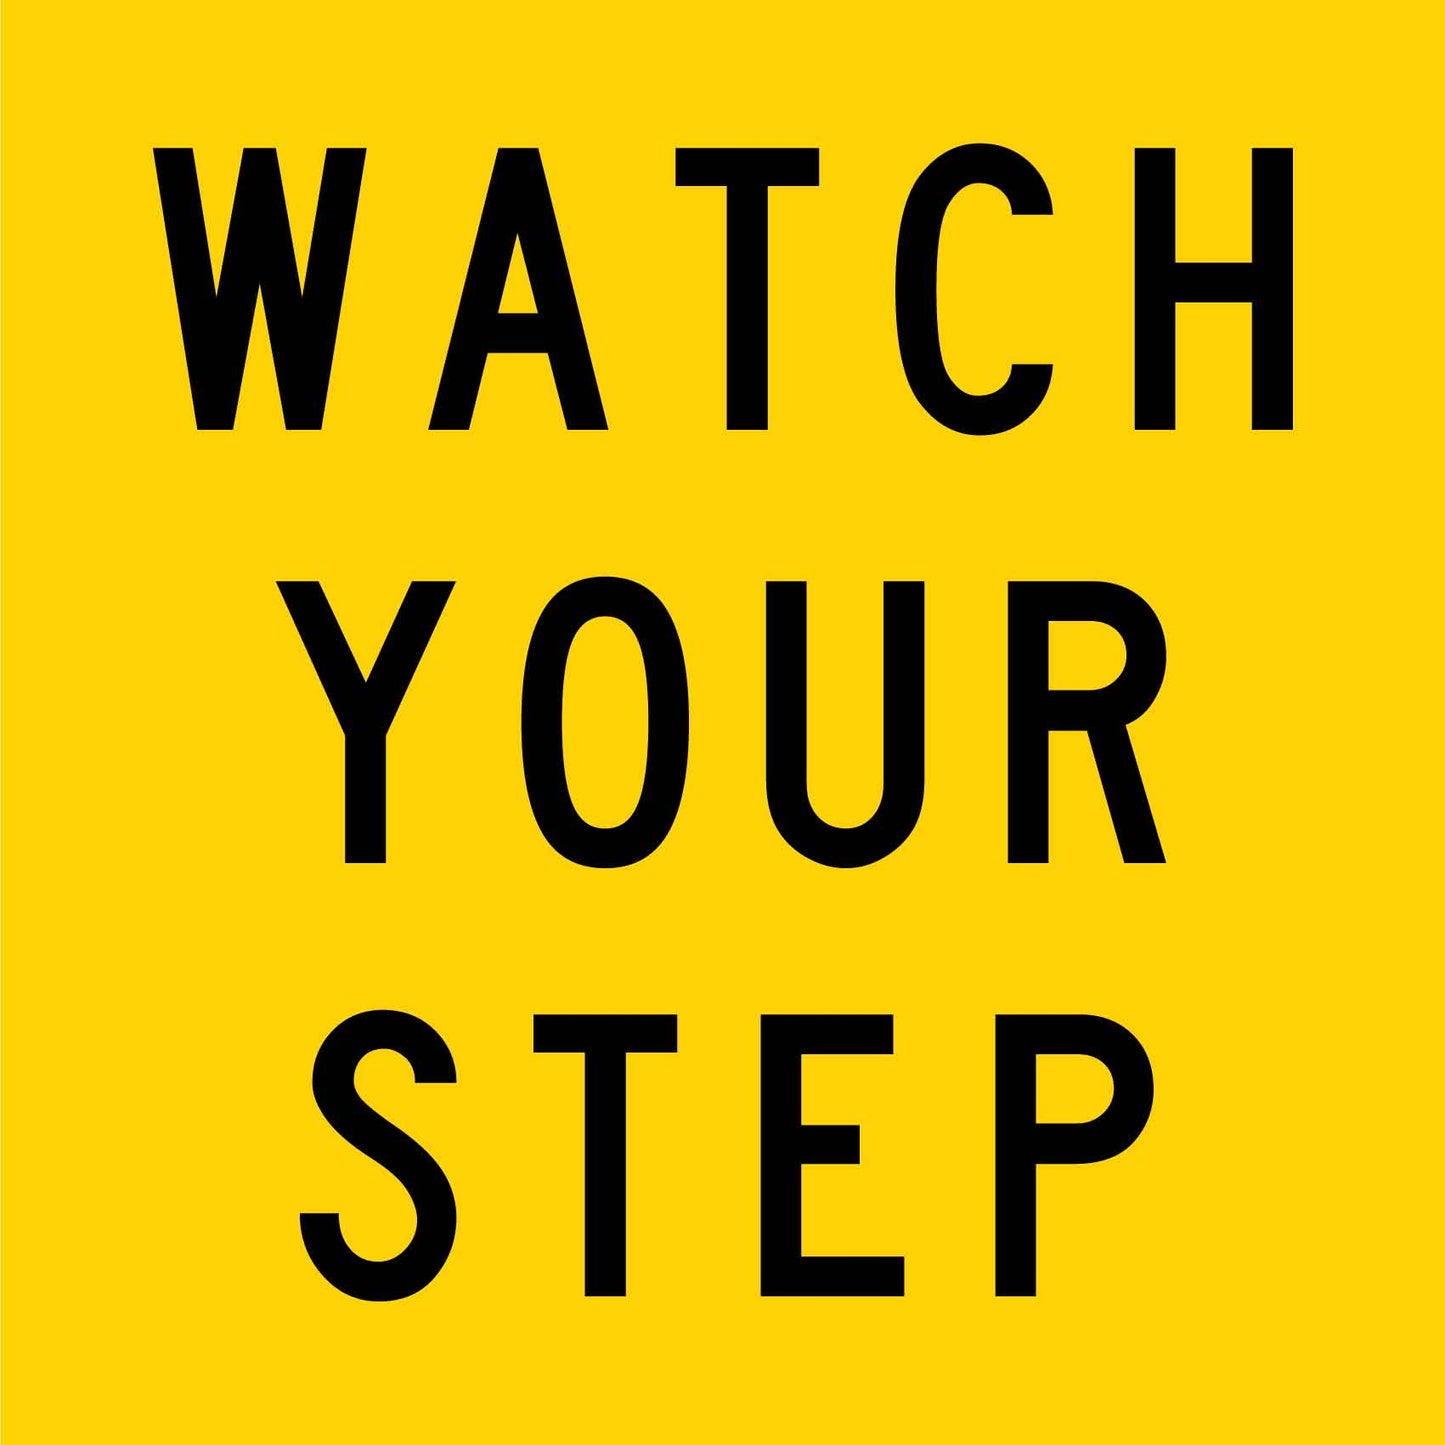 Watch Your Step Multi Message Traffic Sign